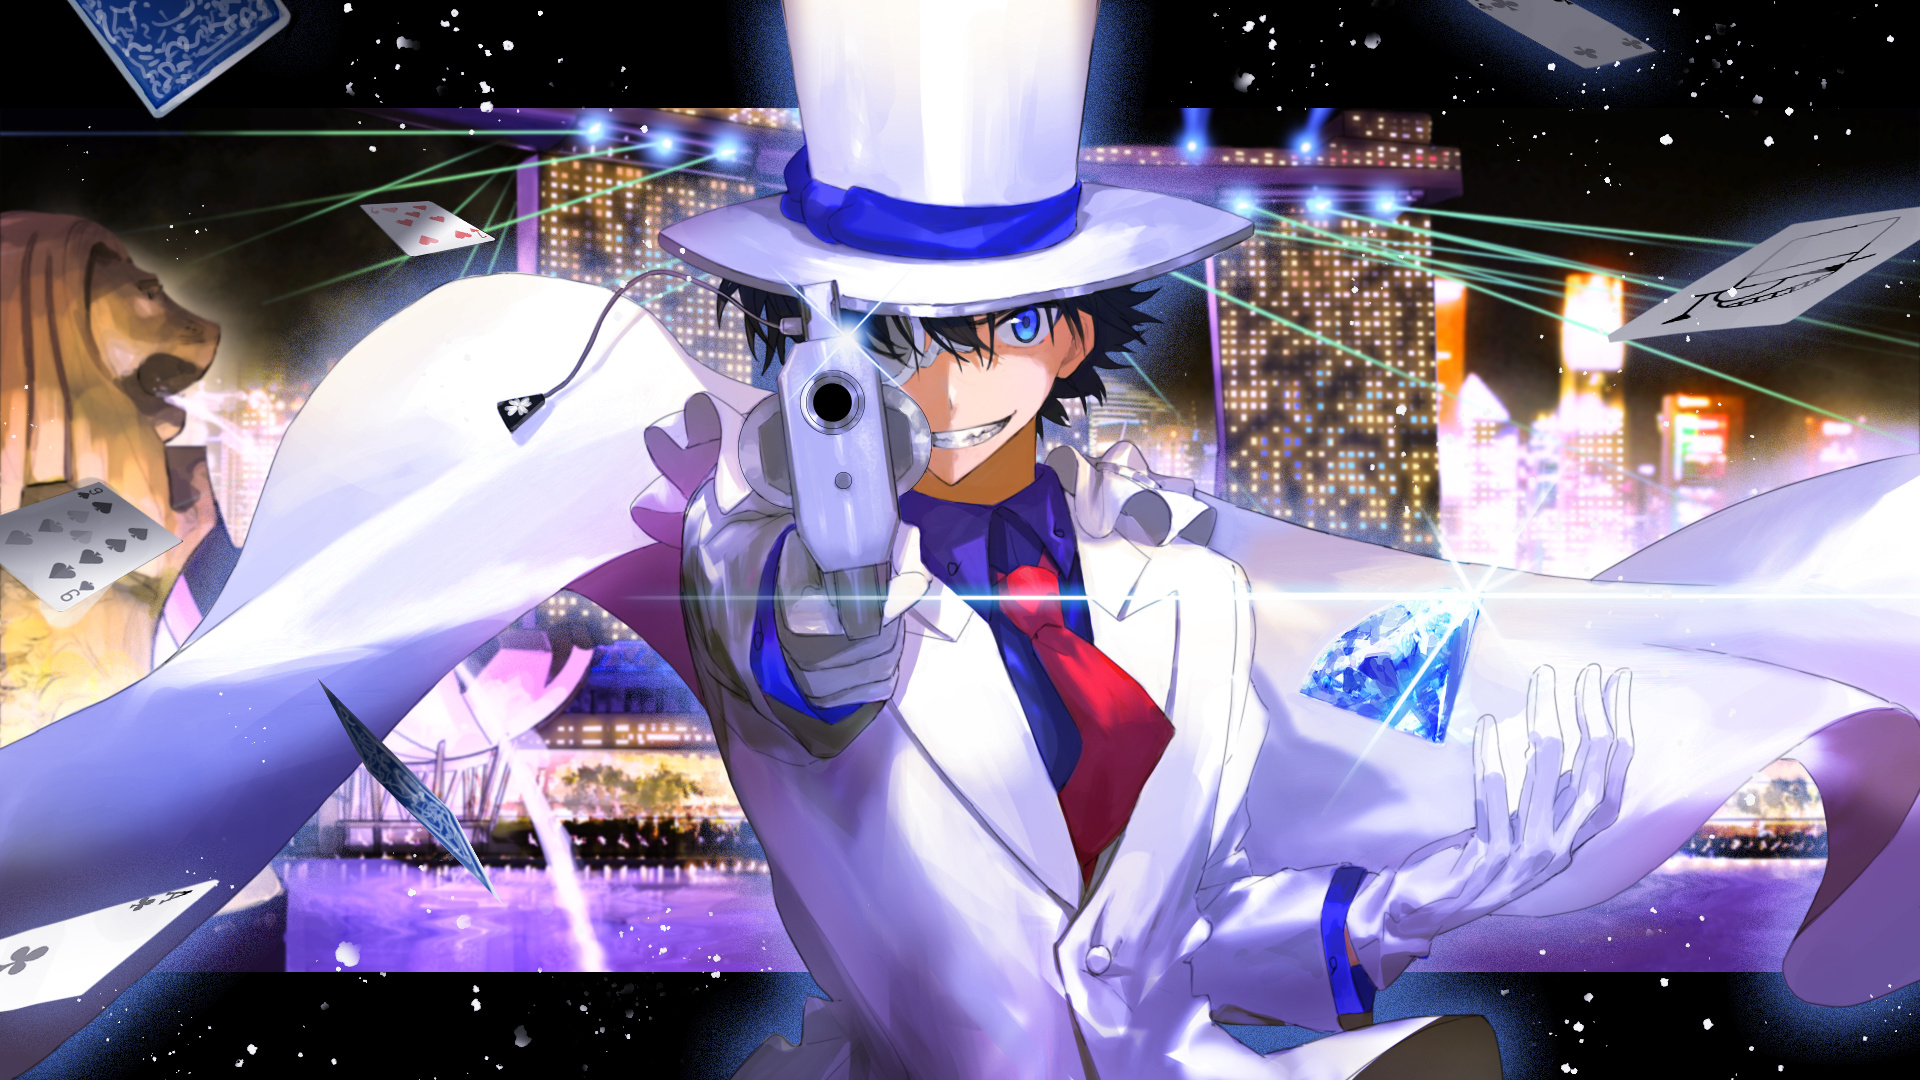 Magic Kaito anime, Eye-catching wallpaper, Anime image board, Cool and confident protagonist, 1920x1080 Full HD Desktop